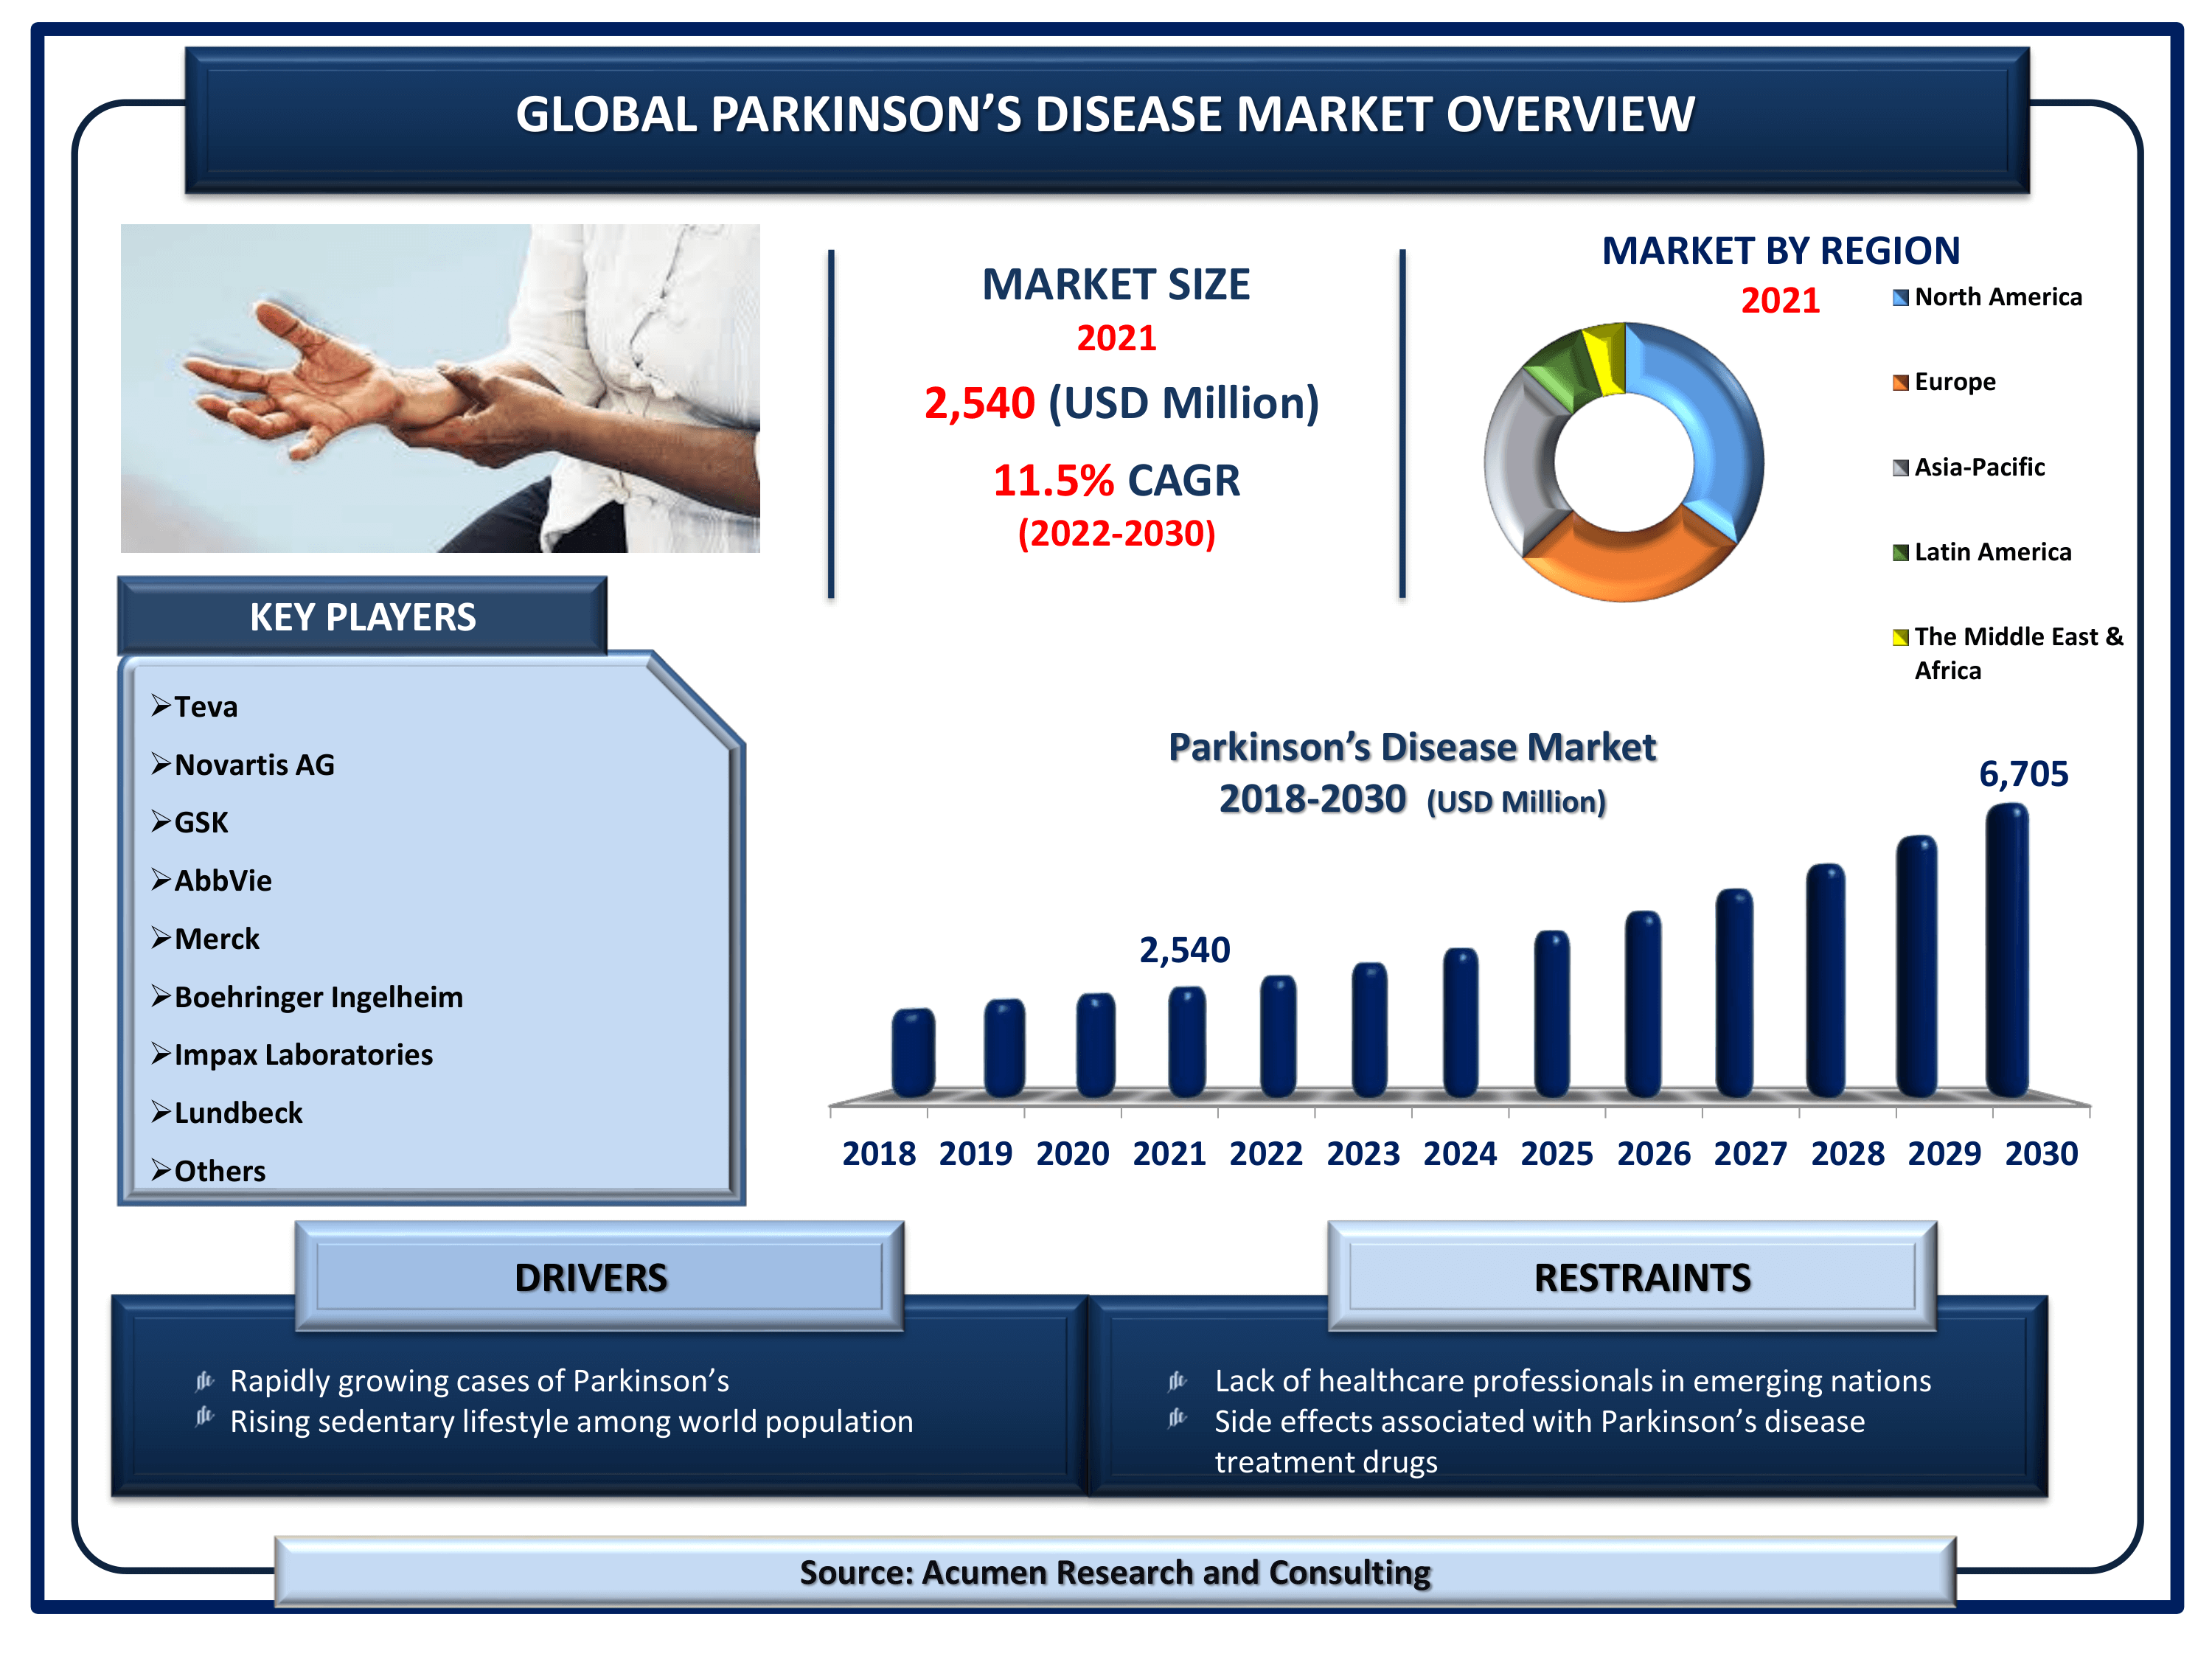 The Global Parkinson’s Disease Market Size accounted for USD 2,540 Million in 2021 and is estimated to achieve a market size of USD 6,705 Million By 2030 growing at a CAGR of 11.5% from 2022 to 2030.